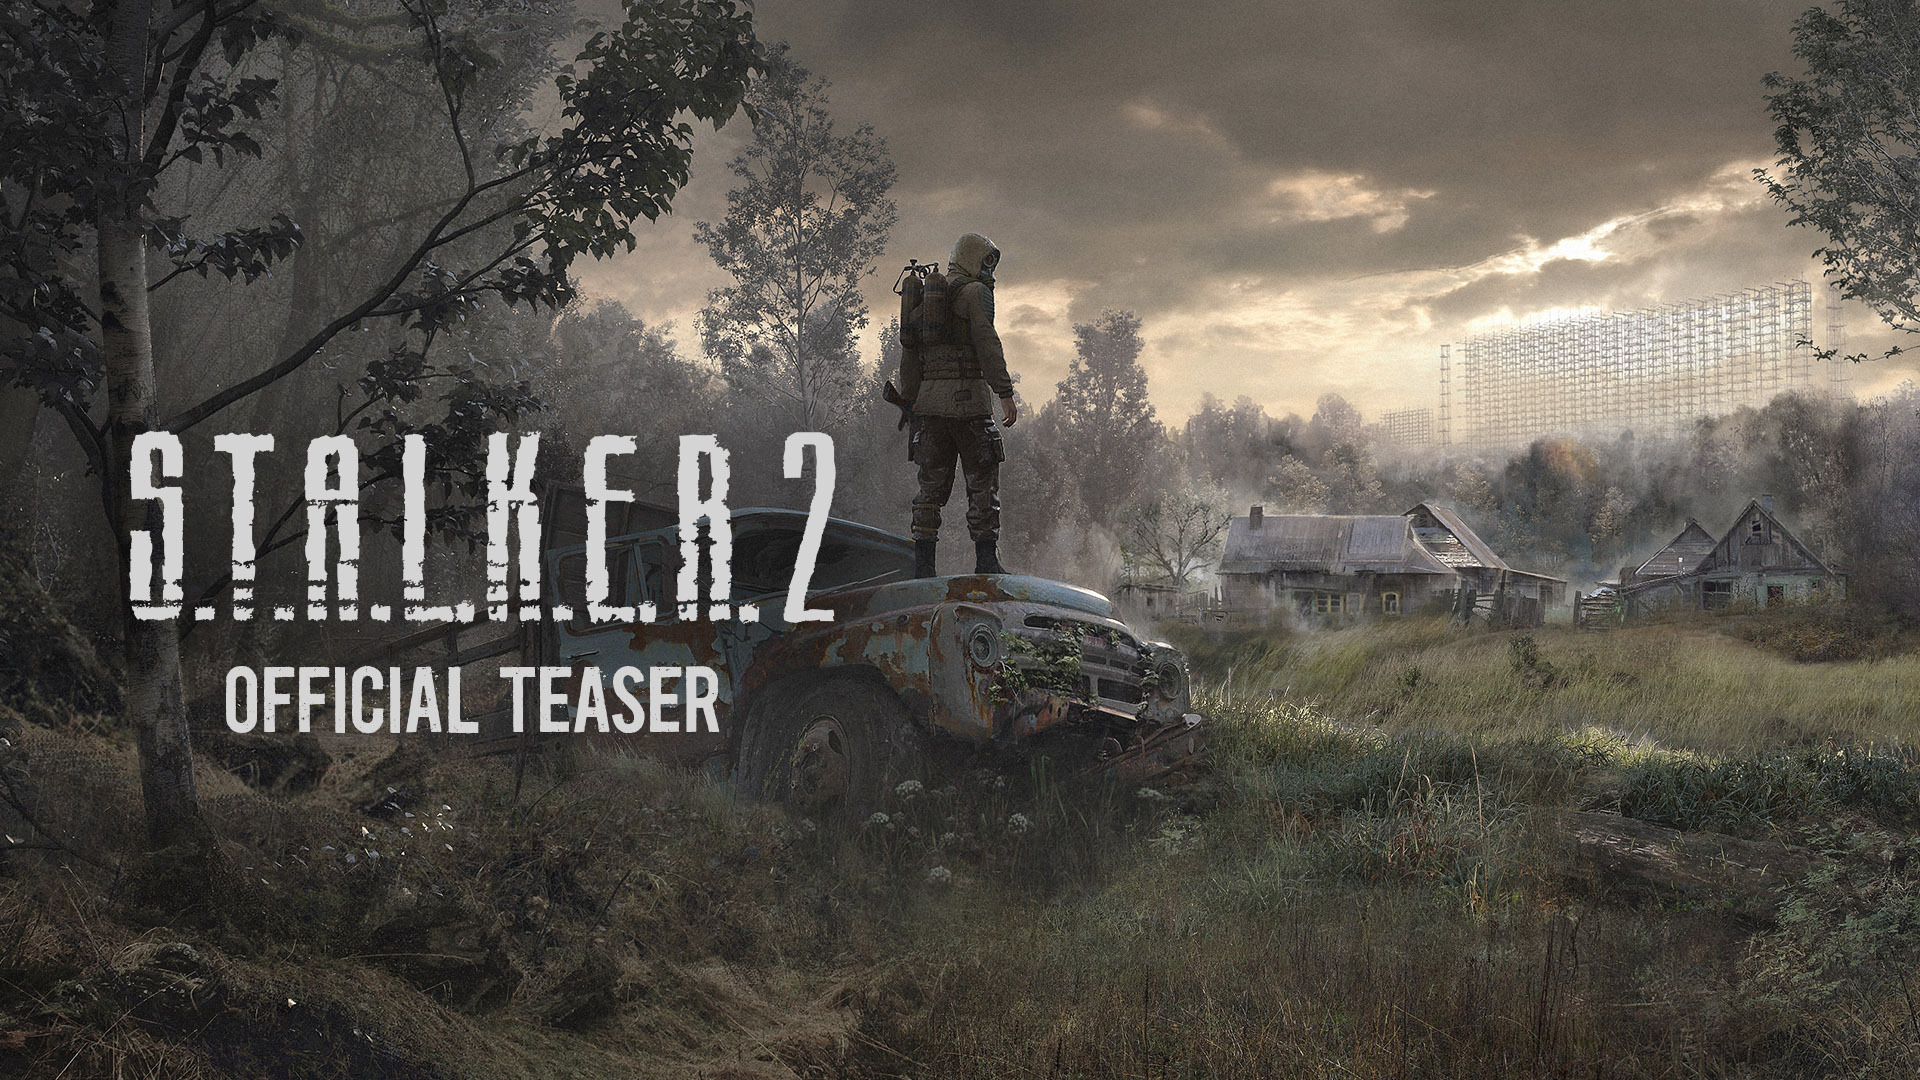 S.T.A.L.K.E.R. 2 Development Update: a Gameplay Teaser and a New Hero -  Xbox Wire